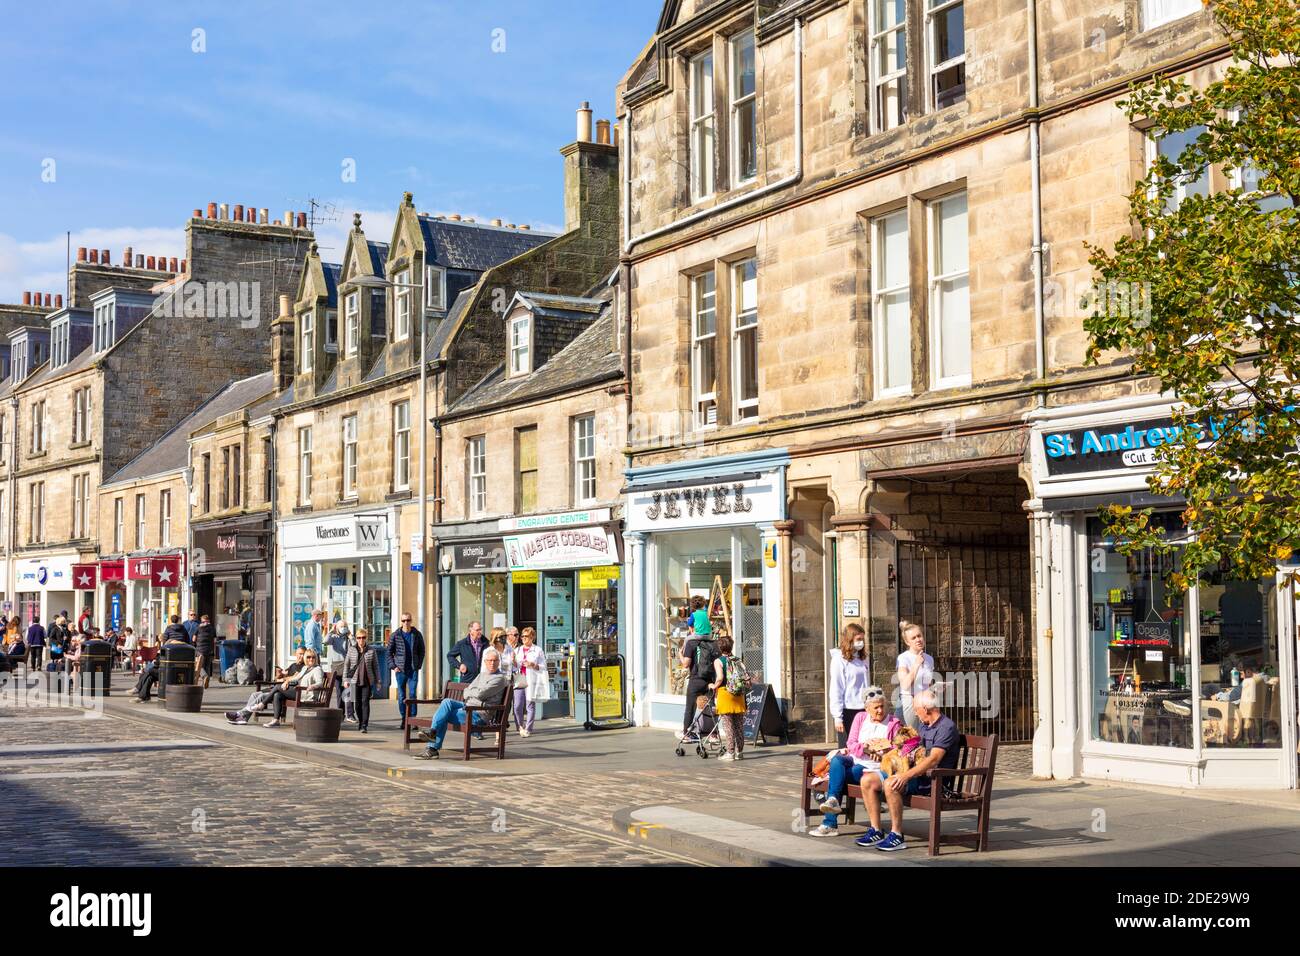 St Andrews Town centre with shops cafes and restaurants Royal Burgh of St Andrews Fife Scotland UK GB Europe Stock Photo